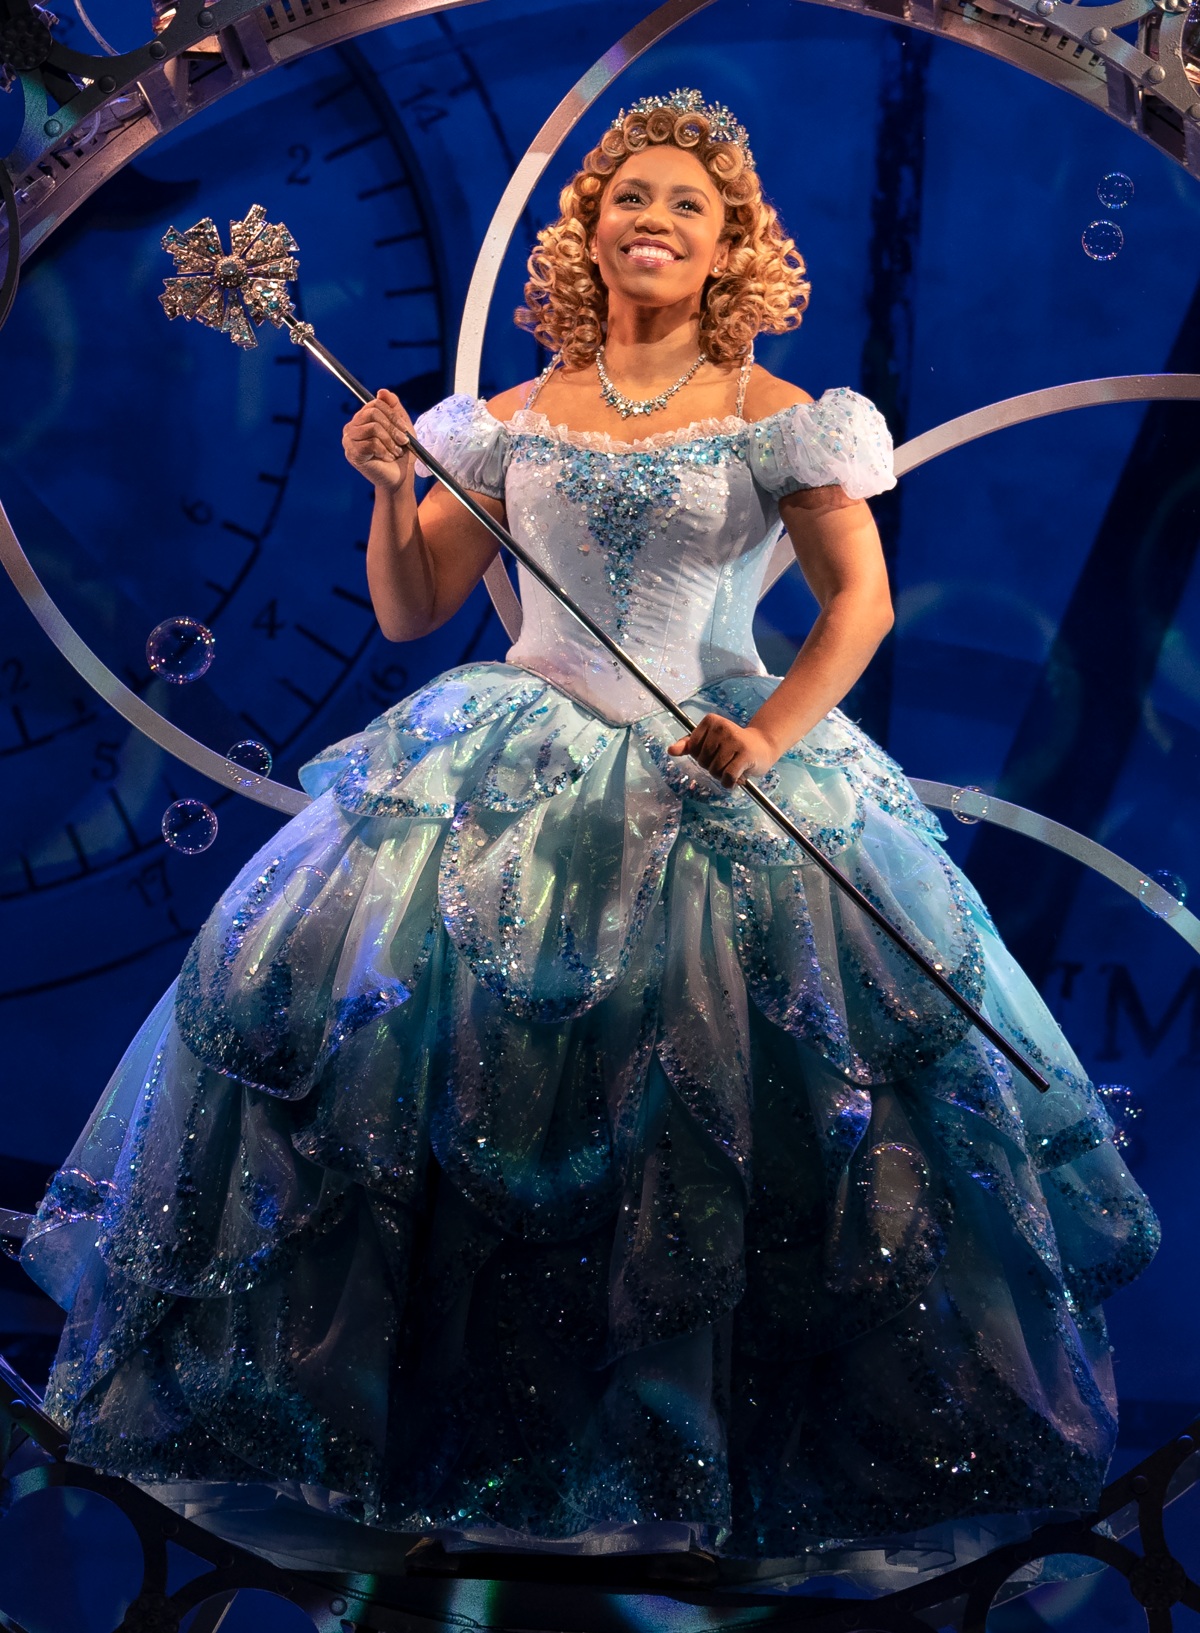 A woman with curly blond hair wearing a blue ballgown and wielding a magic scepter